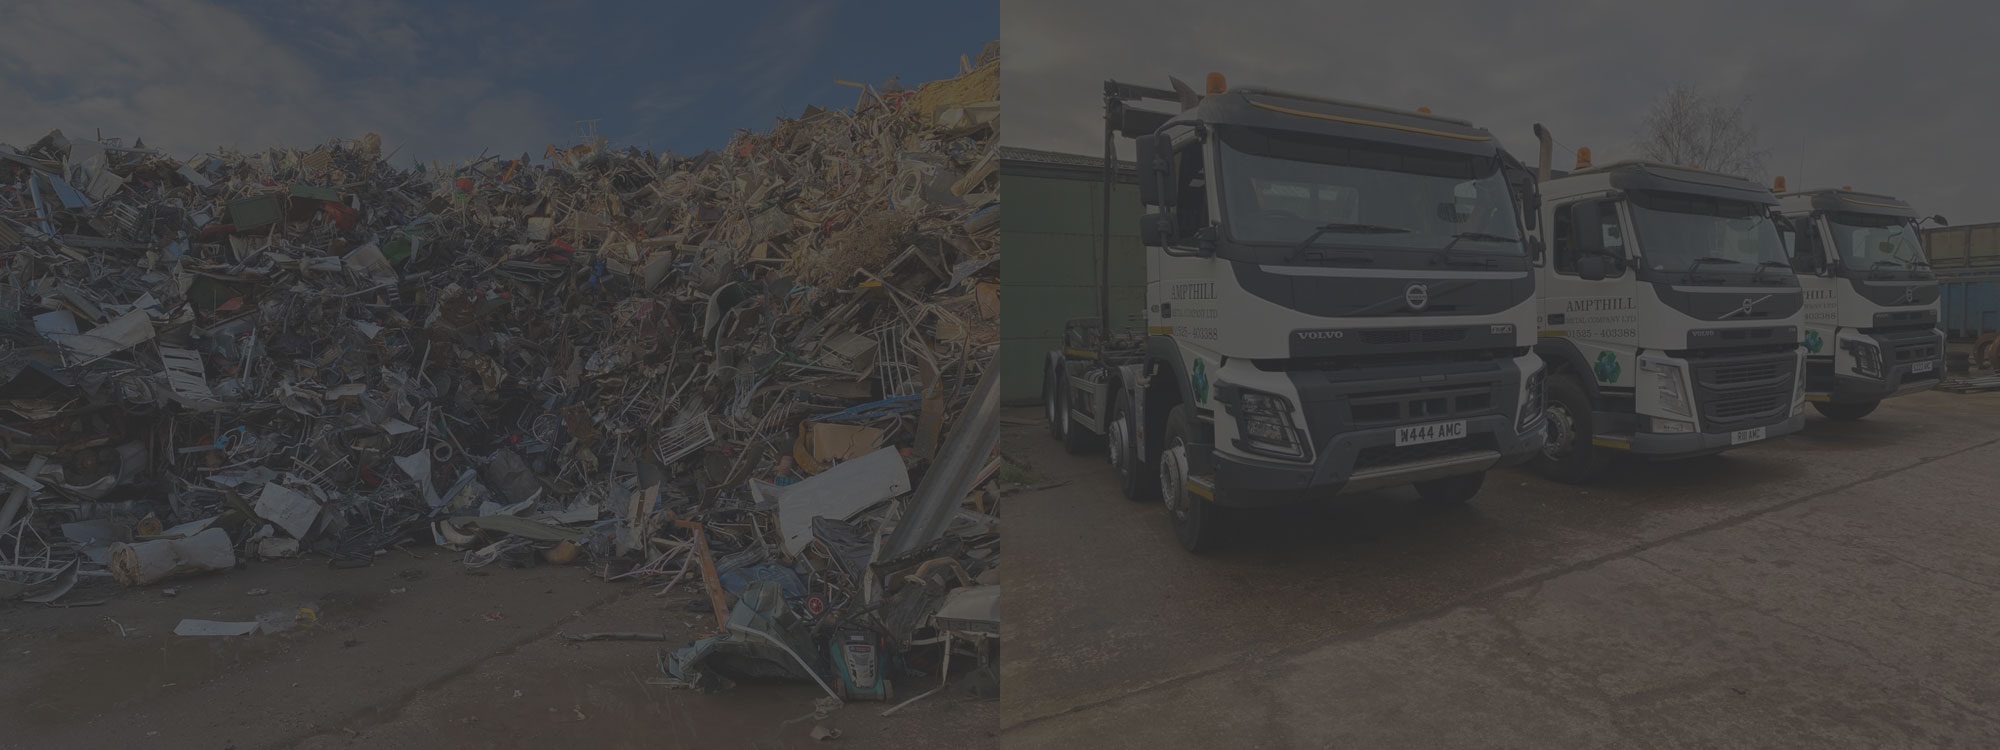 Scrap Metal Recycling for Coventry and surrounding areas